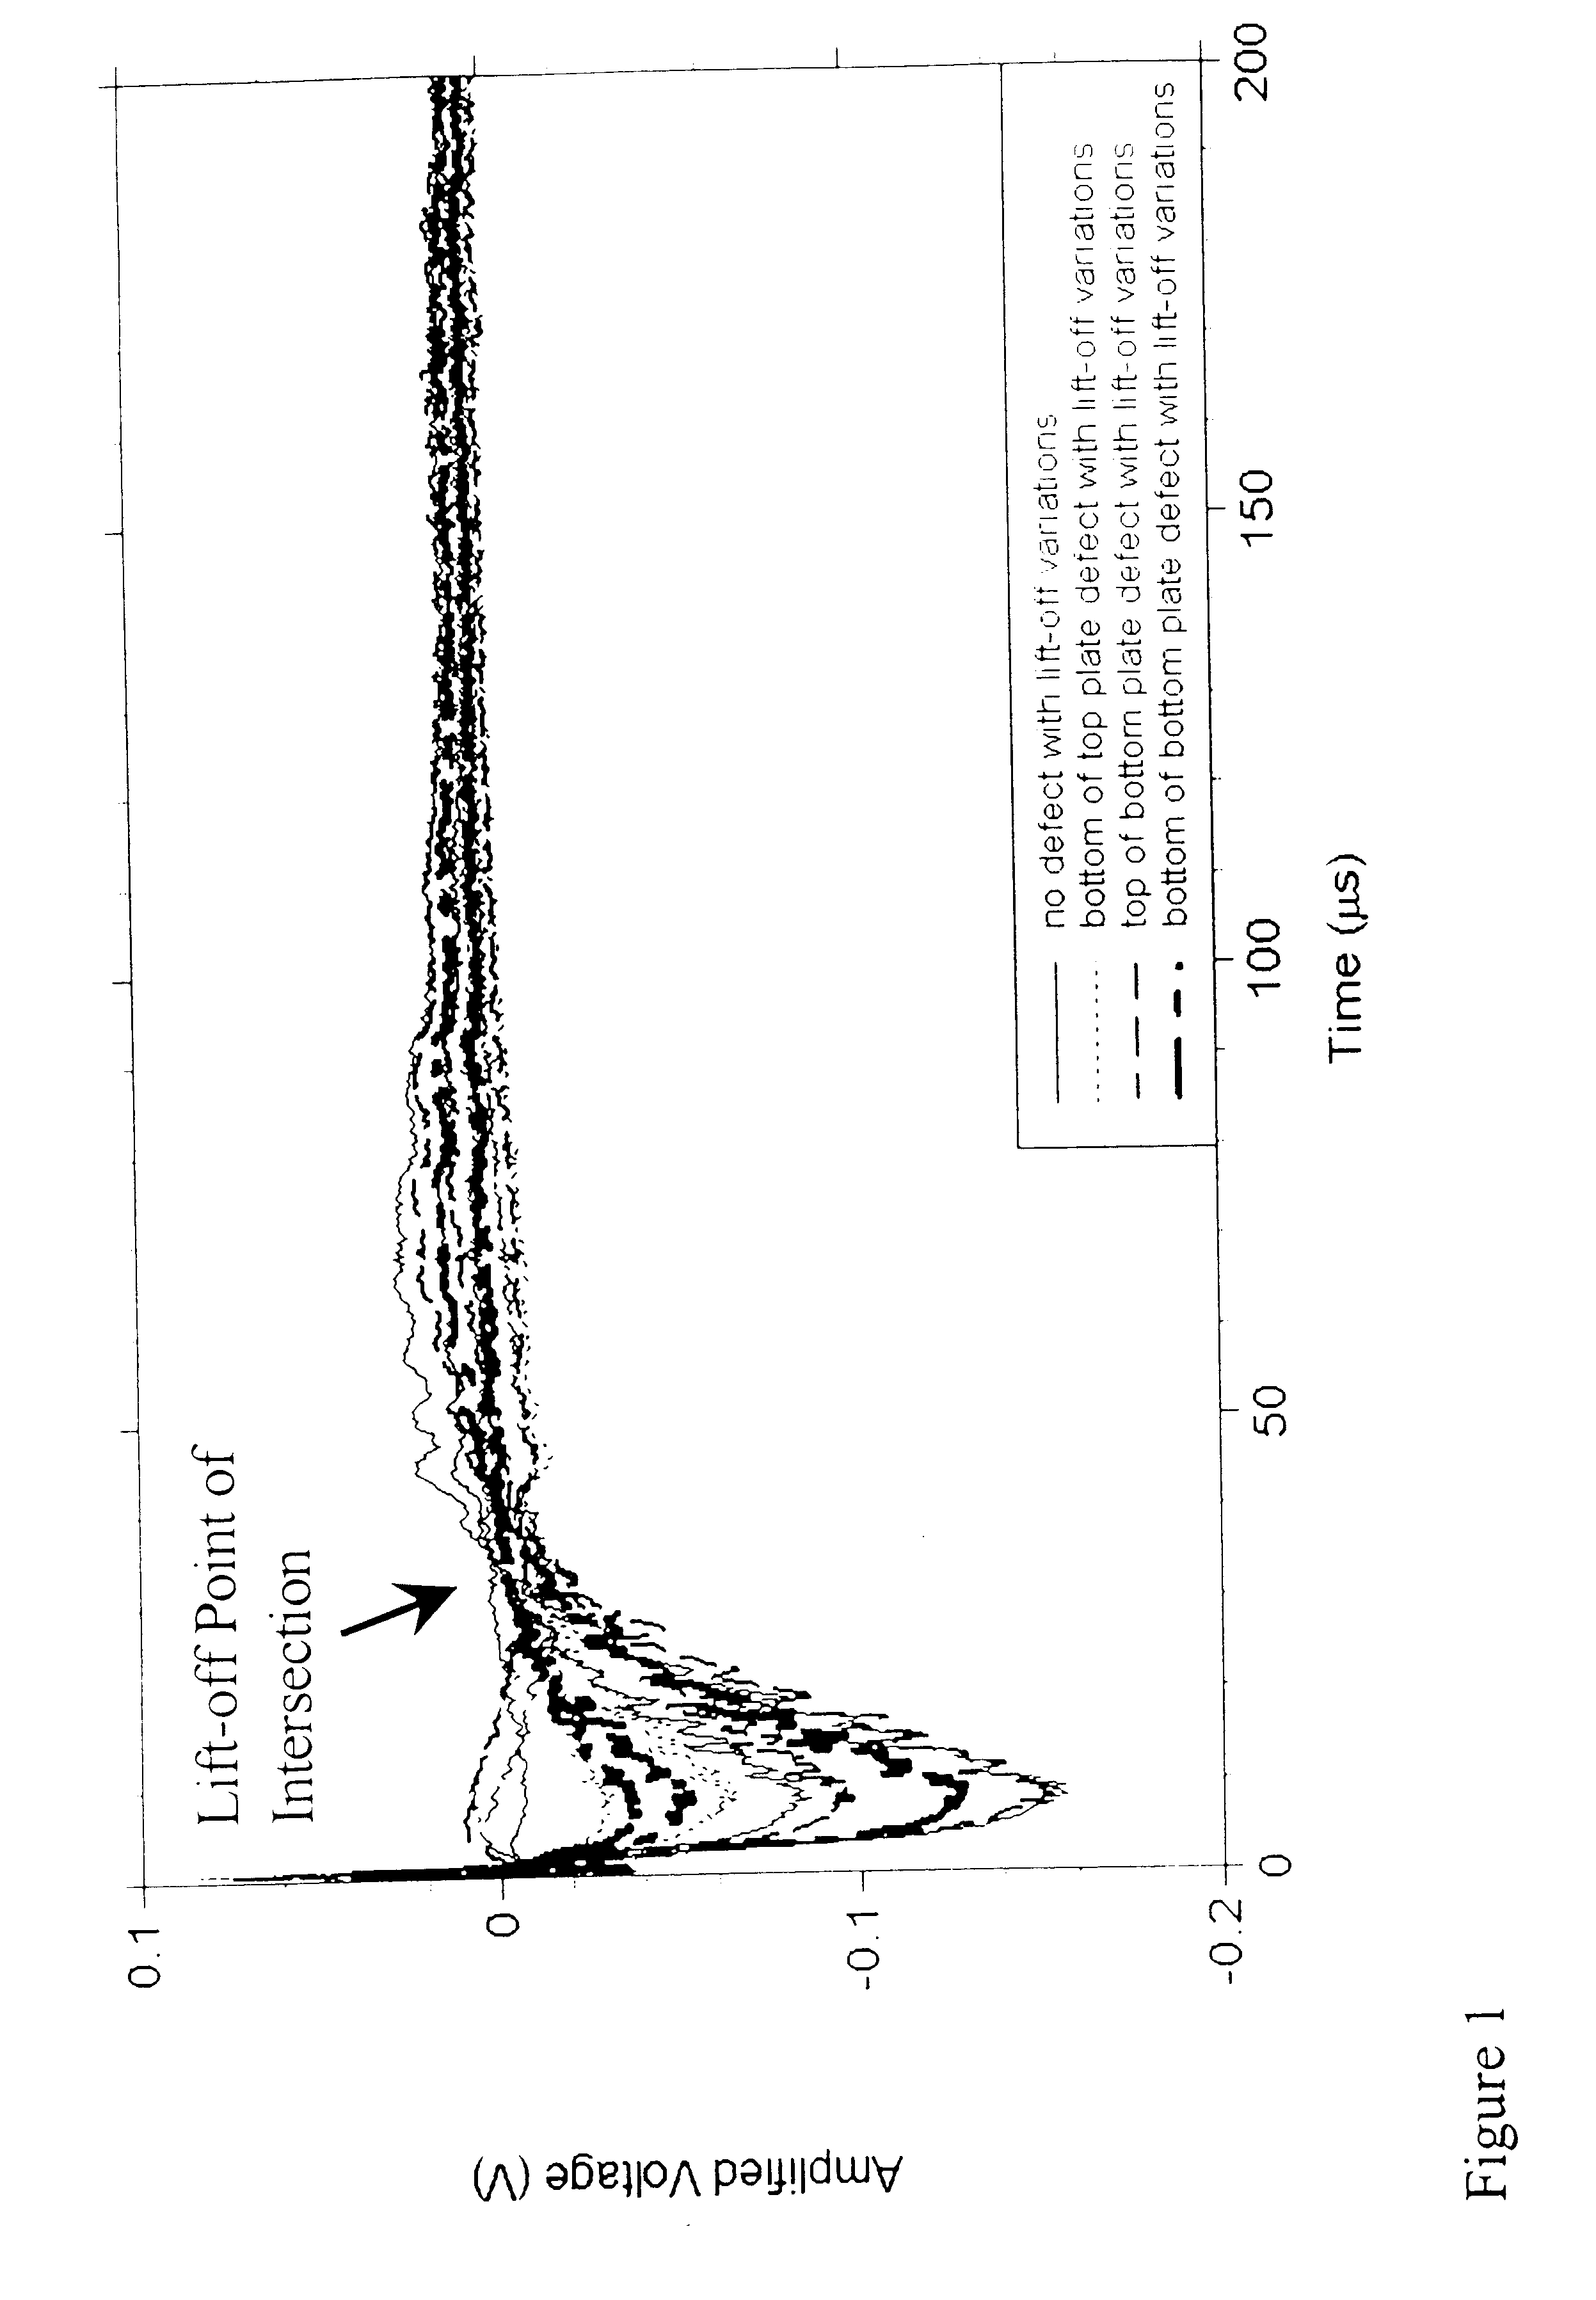 Pulsed eddy current method for detection of corrosion in multilayer structures using the lift-off point of intersection